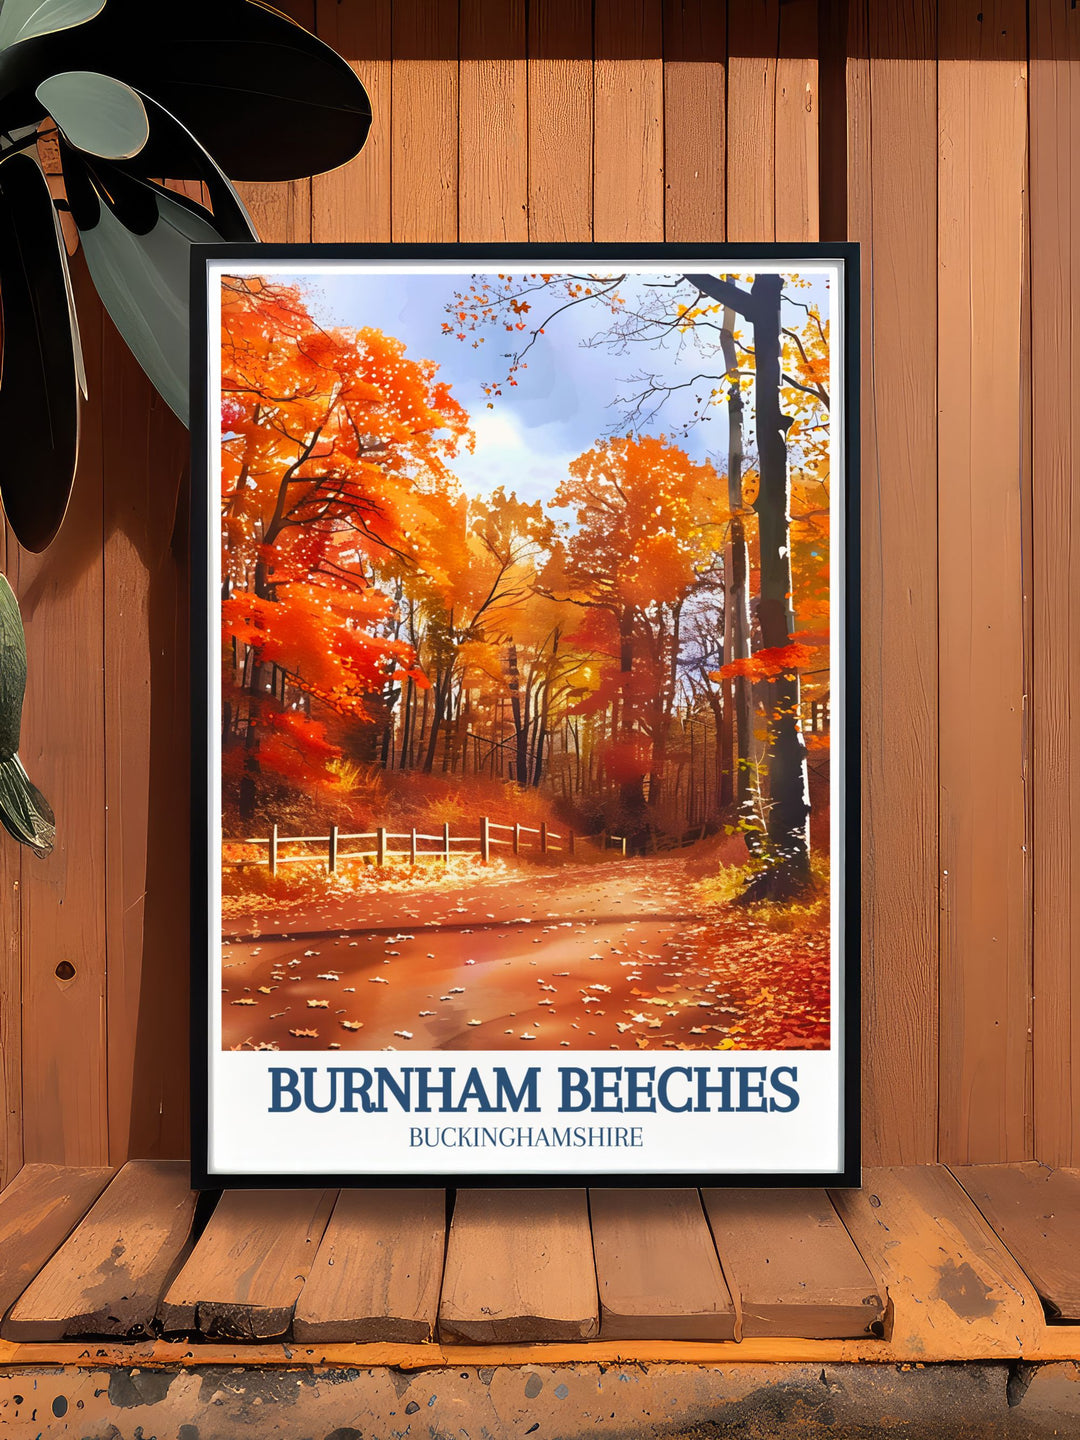 Illustrated with care, this travel poster brings to life the scenic beauty of Burnham Beeches and the historical allure of Hartley Court Moat, ideal for enhancing any room with the UKs vibrant and diverse landscapes.